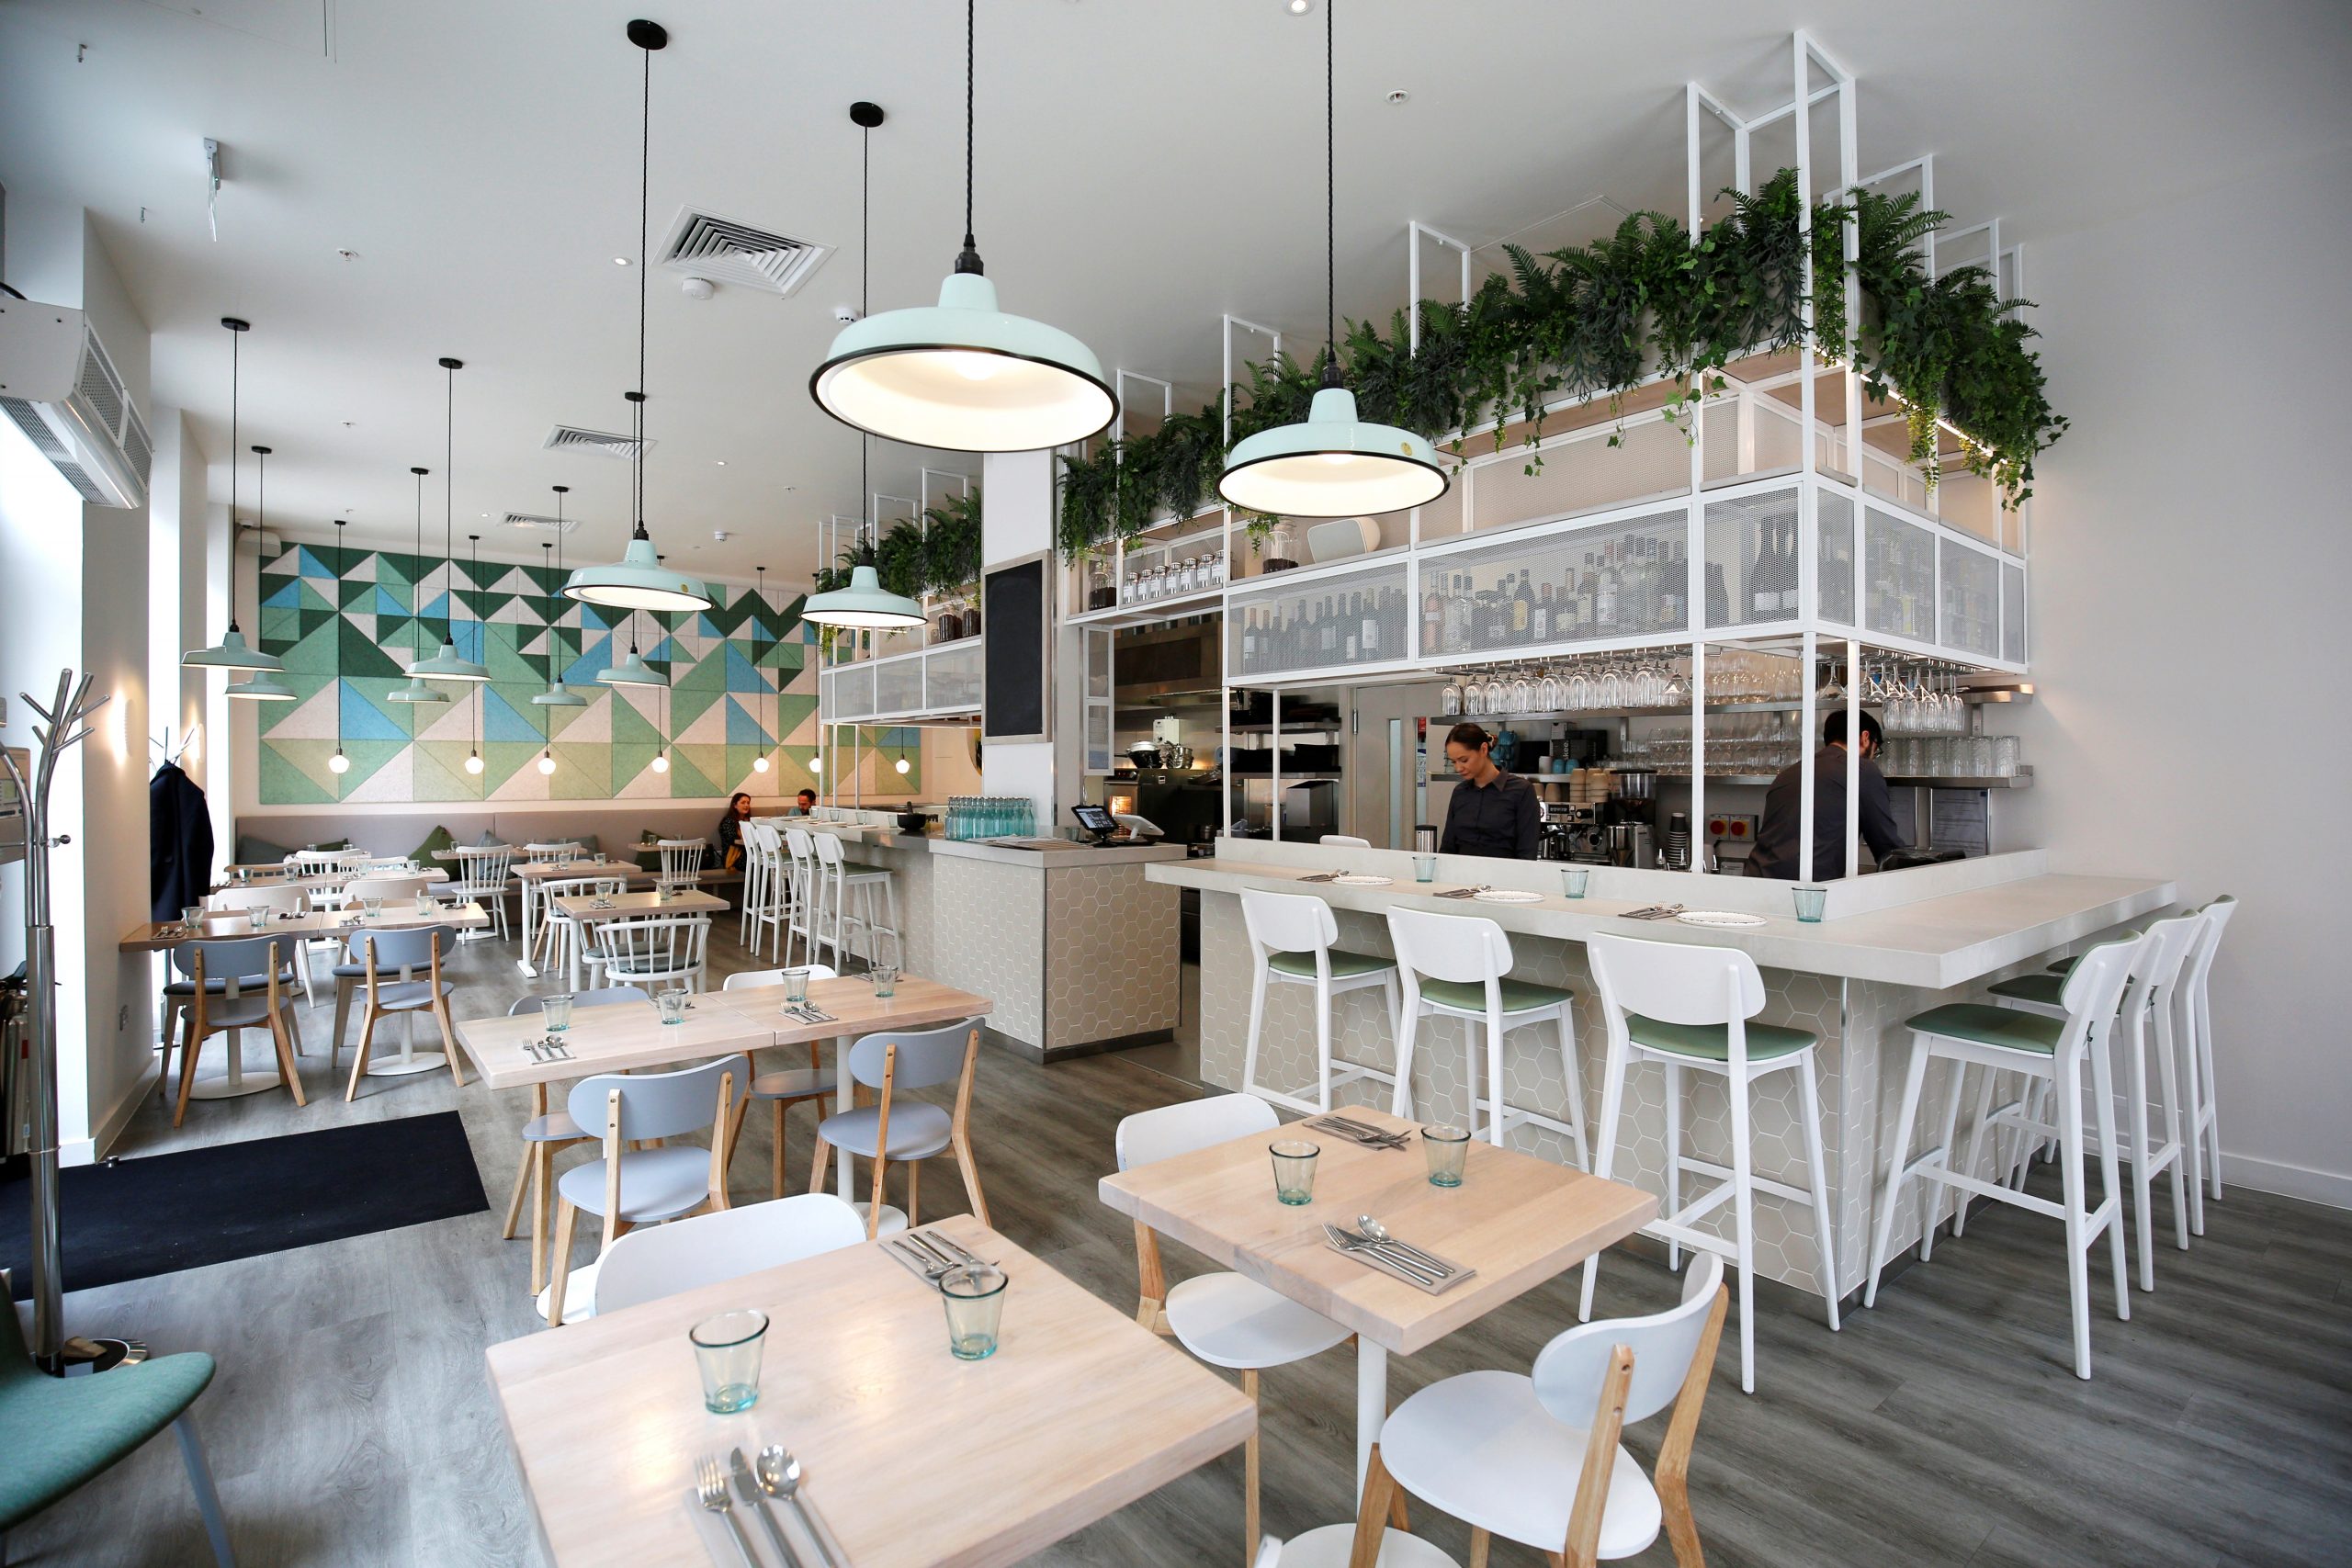 Stem & Glory interior: stem & glory first restaurant to commit to carbon neutral by end of 2021